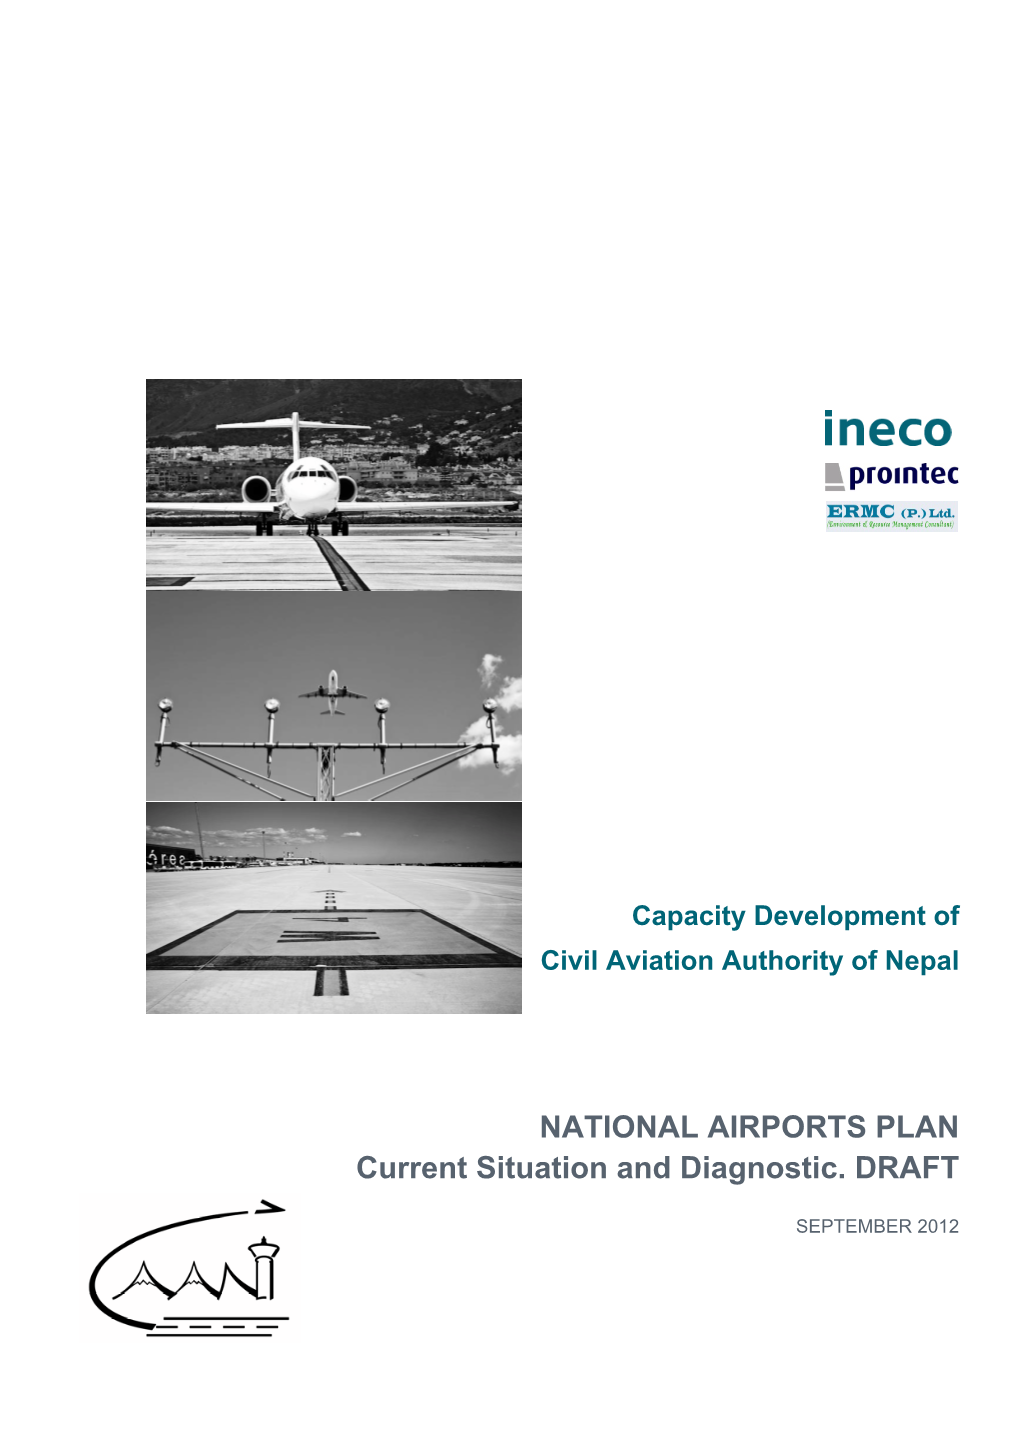 NATIONAL AIRPORTS PLAN Current Situation and Diagnostic. DRAFT